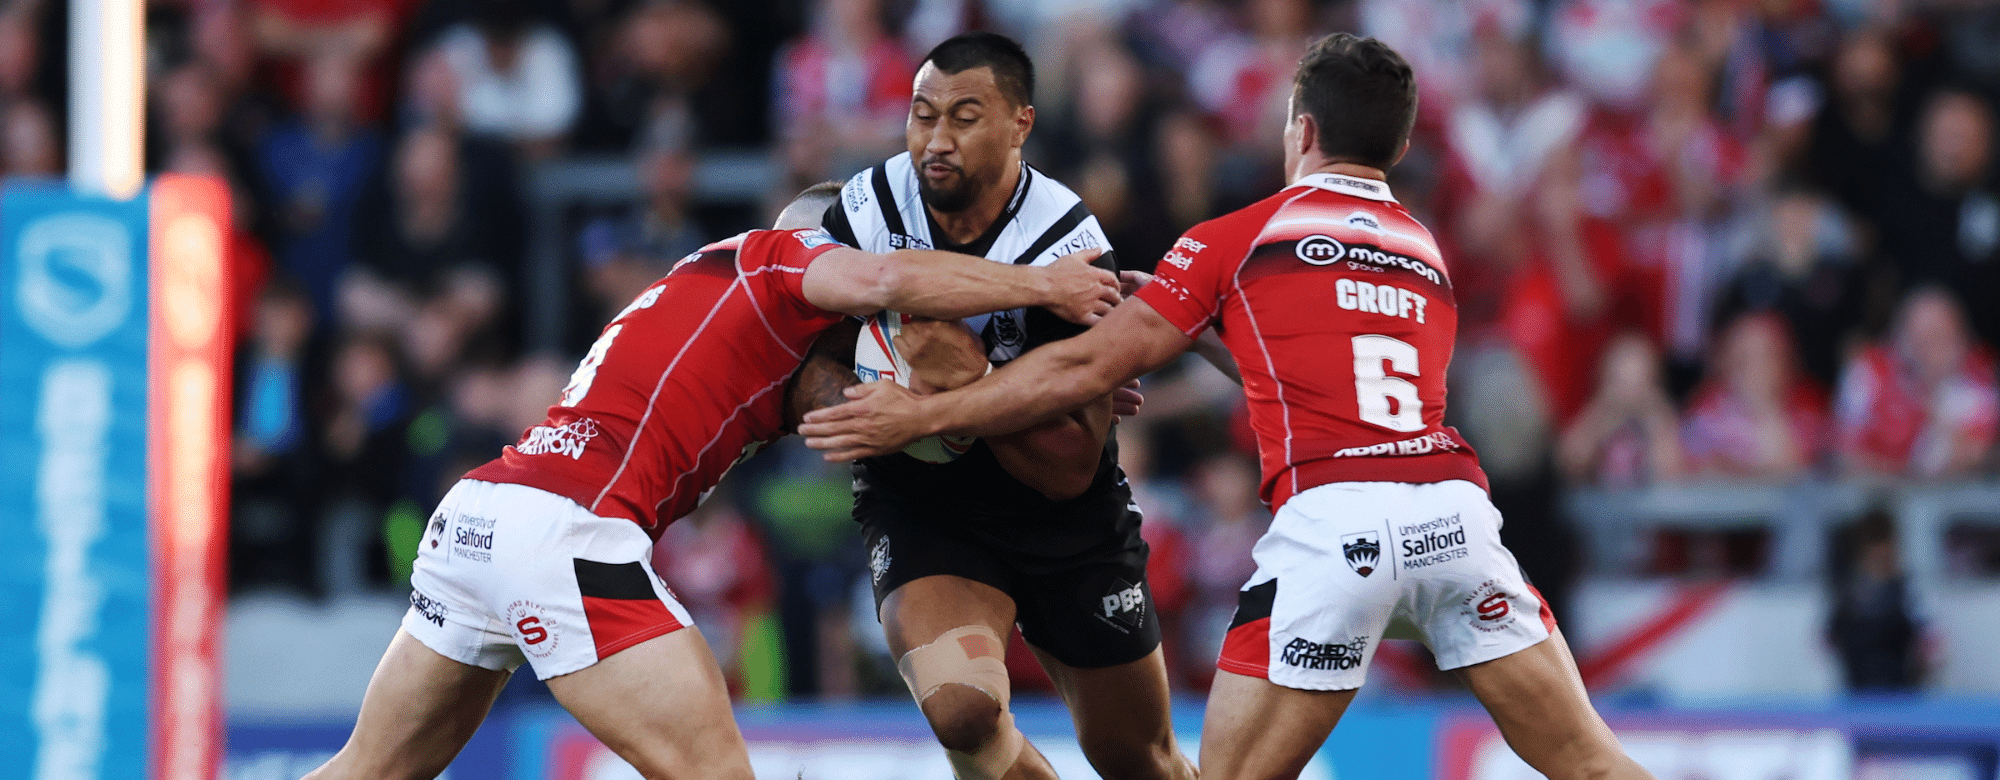 Match Report: Salford Red Devils 28-18 Hull FC